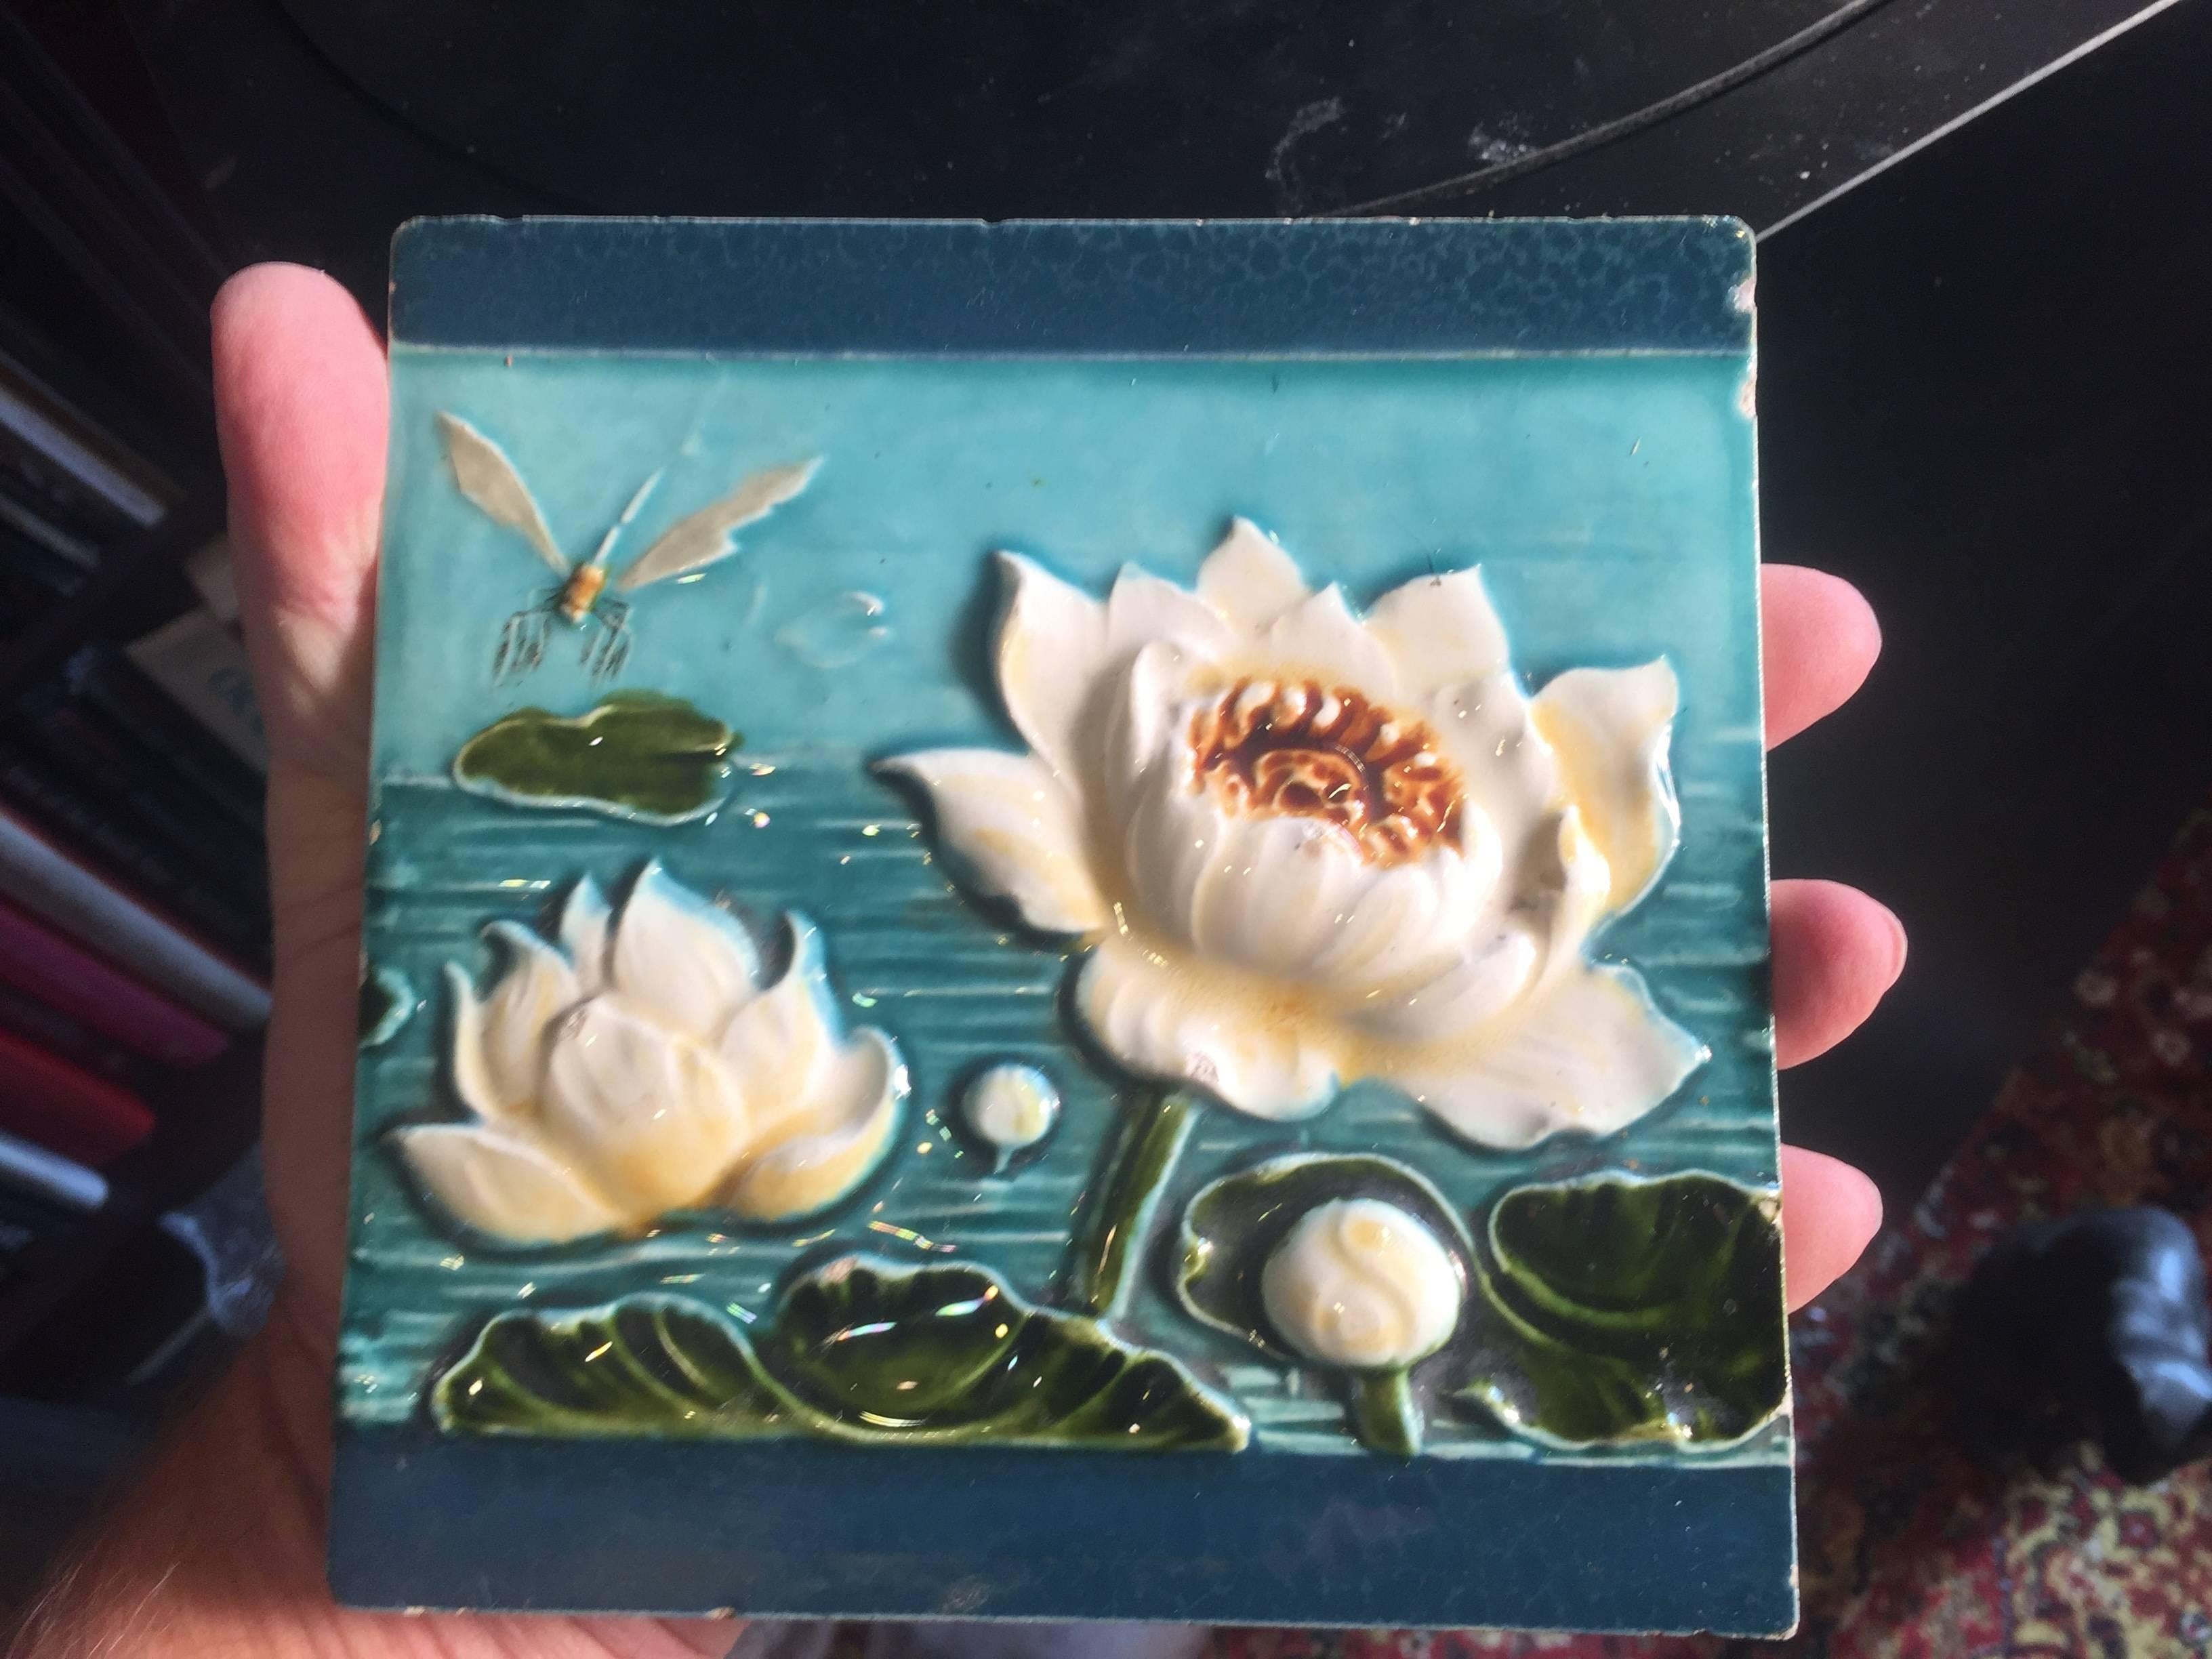 Here's a fine collection of three lovely Art Nouveau ceramic tiles dating to the Jugendstil period (1890-1919), including beautiful dragonfly and water lily designs.

Dimensions: Each tile approx 5.75 inches square each

Impeccable. Fine condition